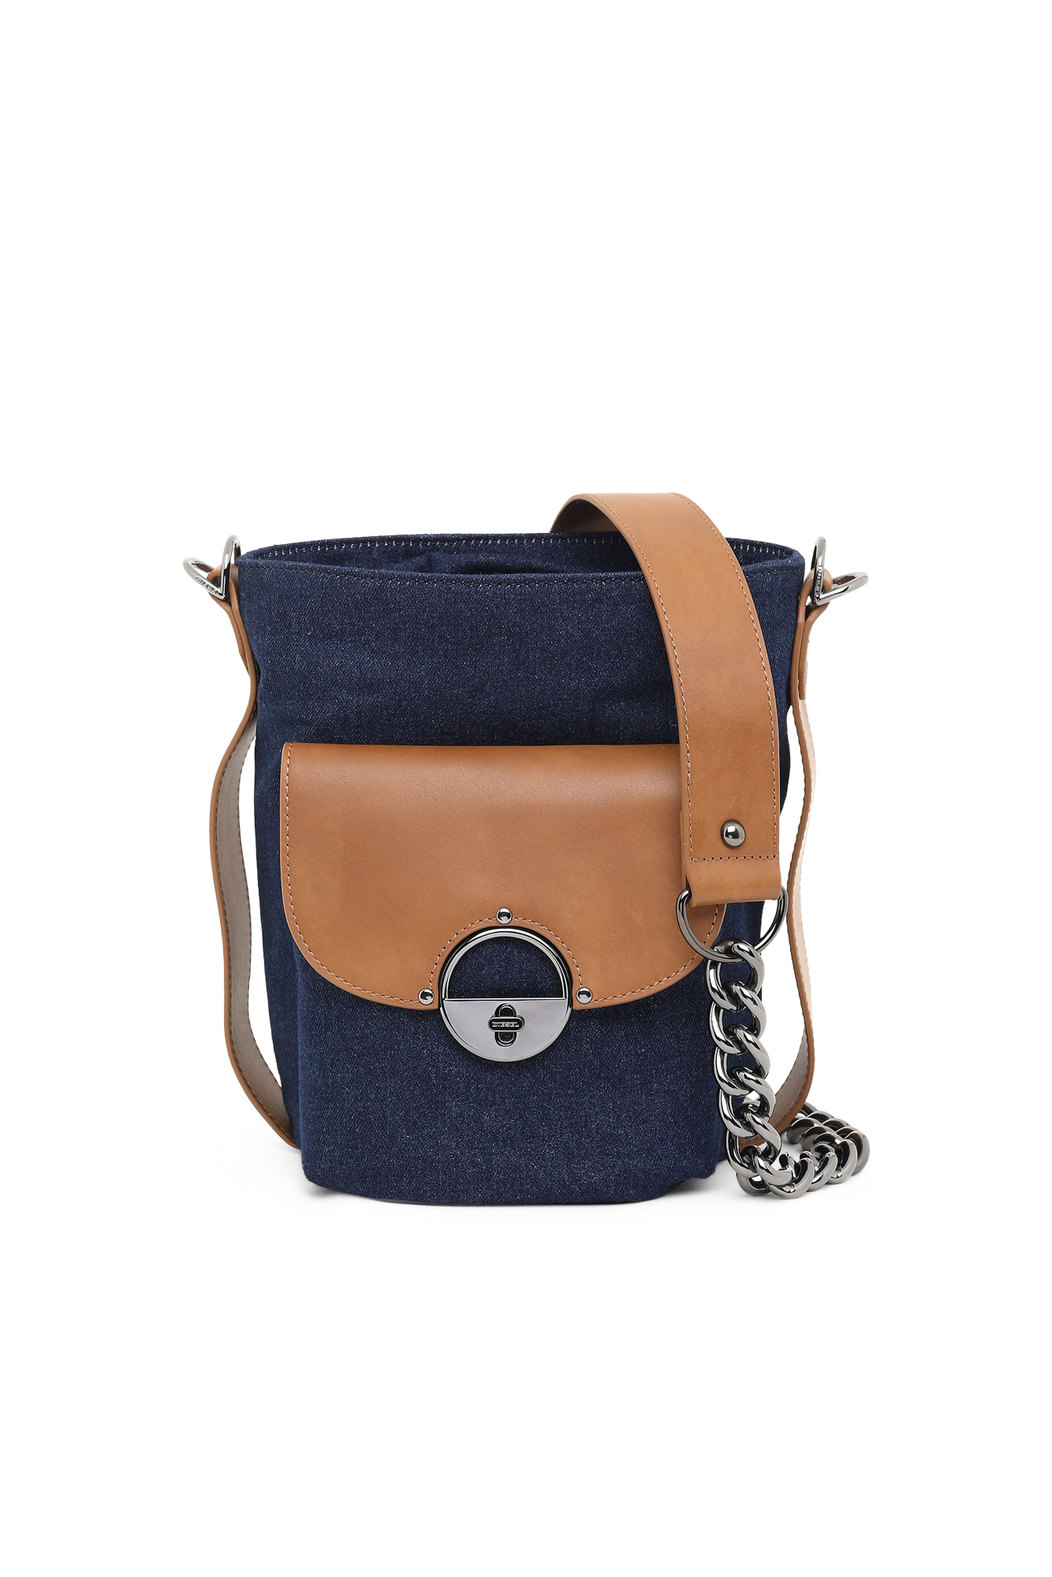 Bucket bag in denim and leather